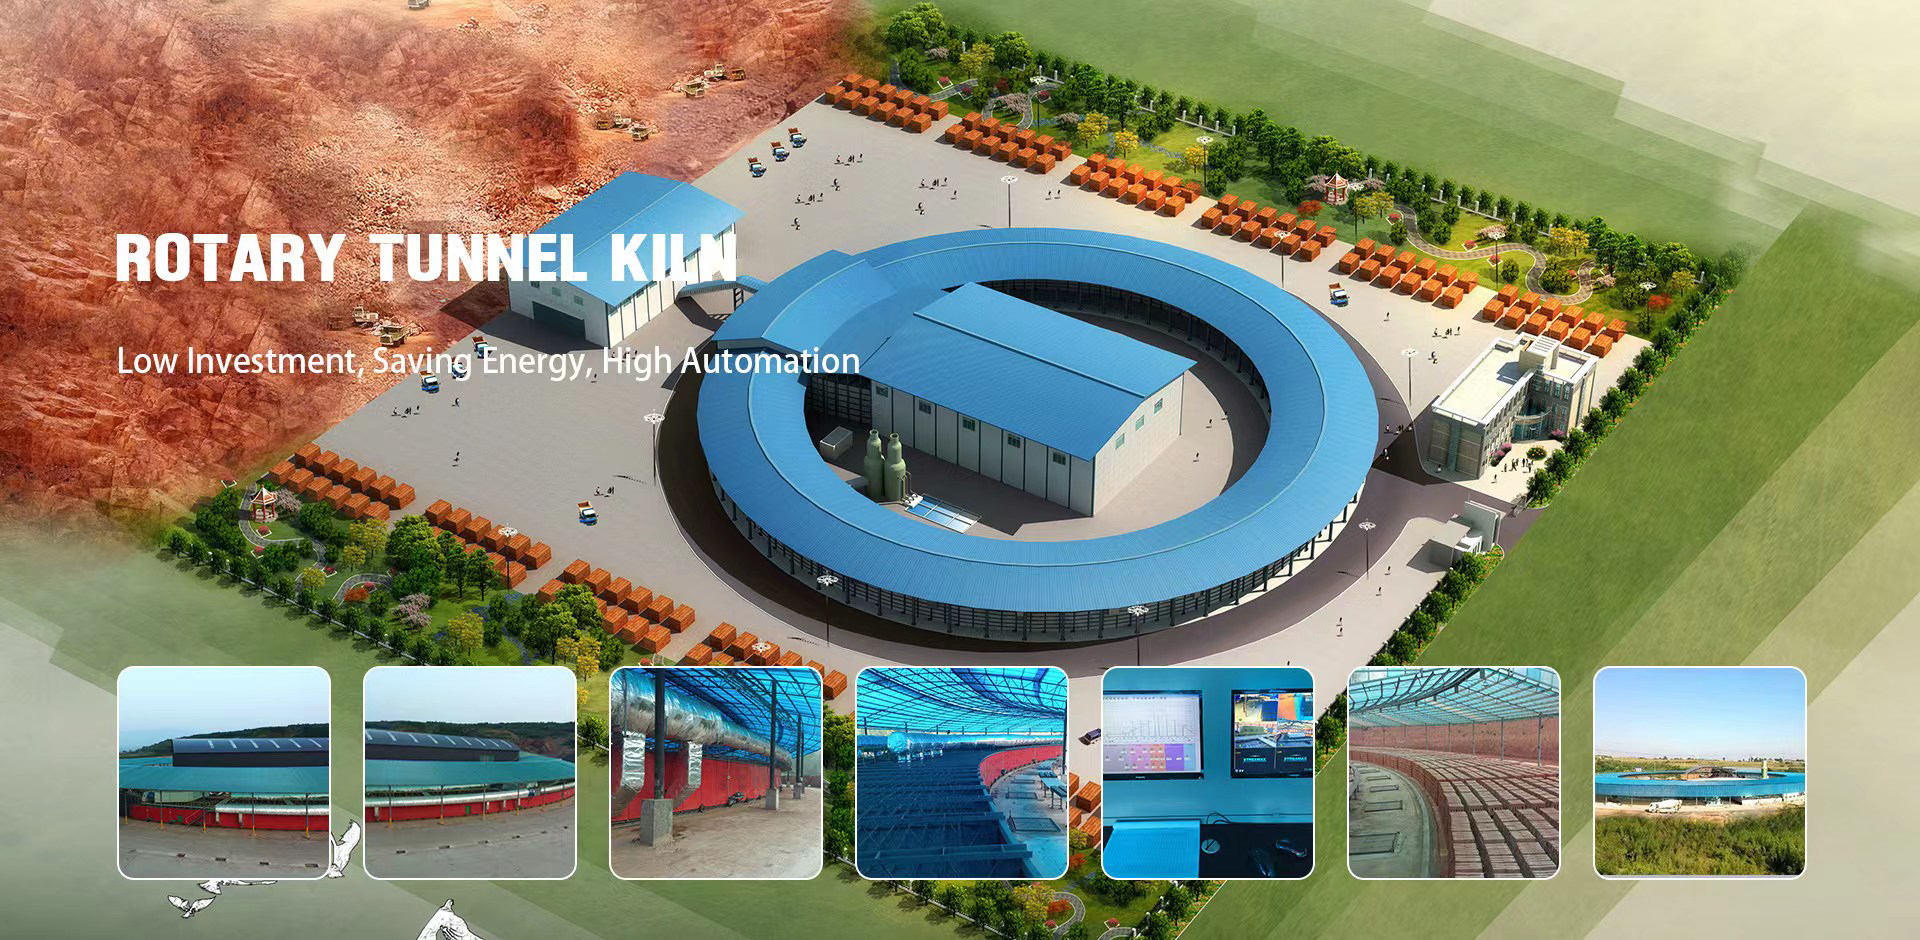 Rotary tunnel kiln is also called movable or mobile tunnel kiln. It is one stop drying and baking kiln for red brick production.